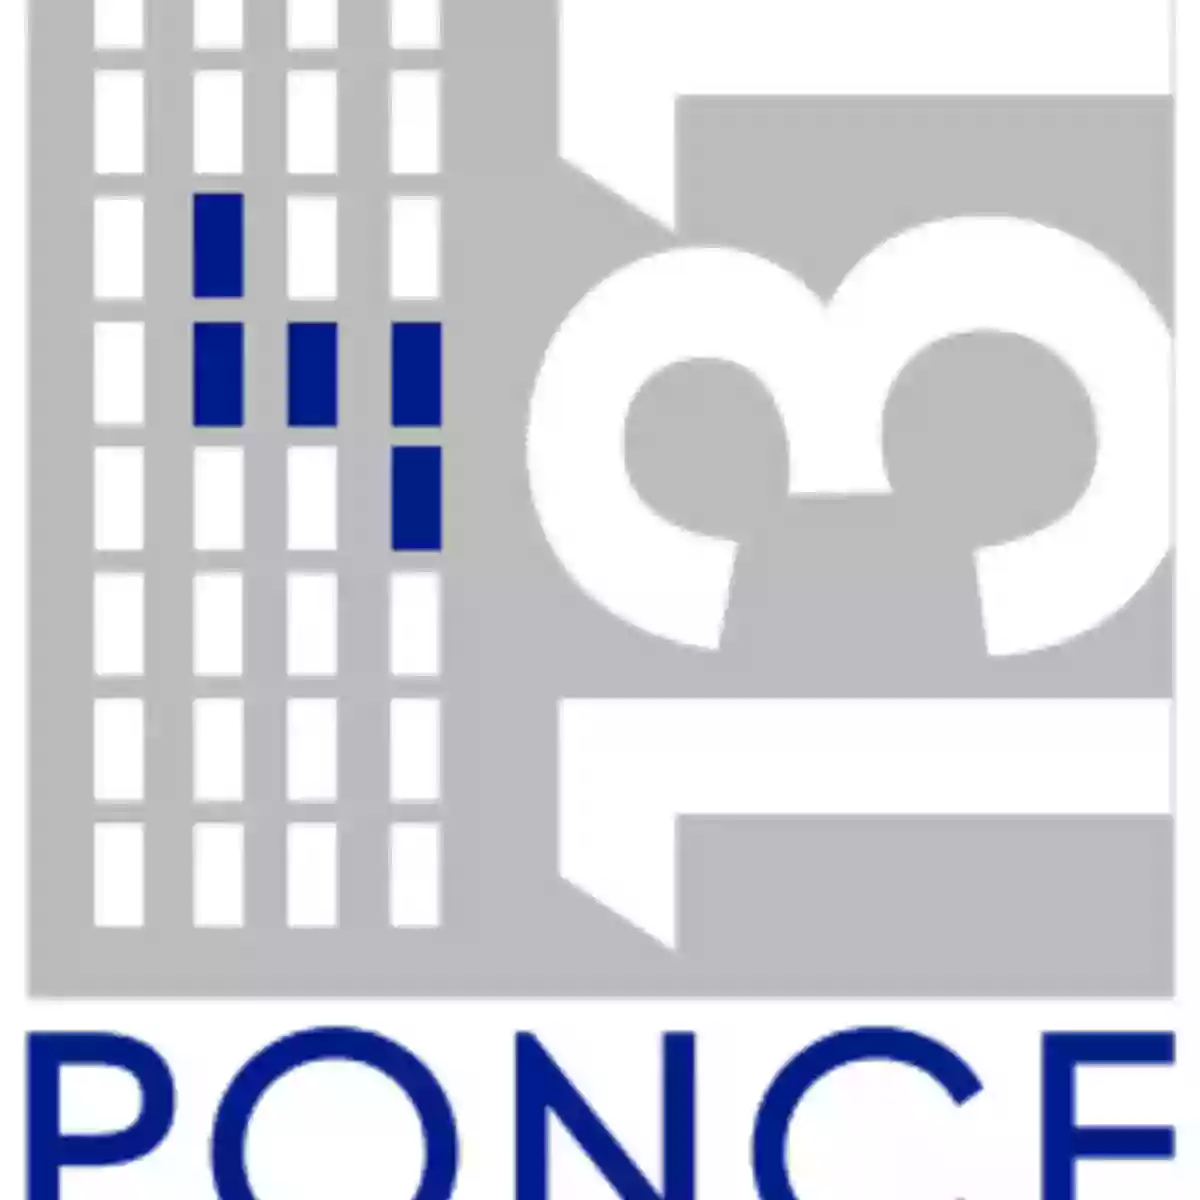 131 Ponce Apartments